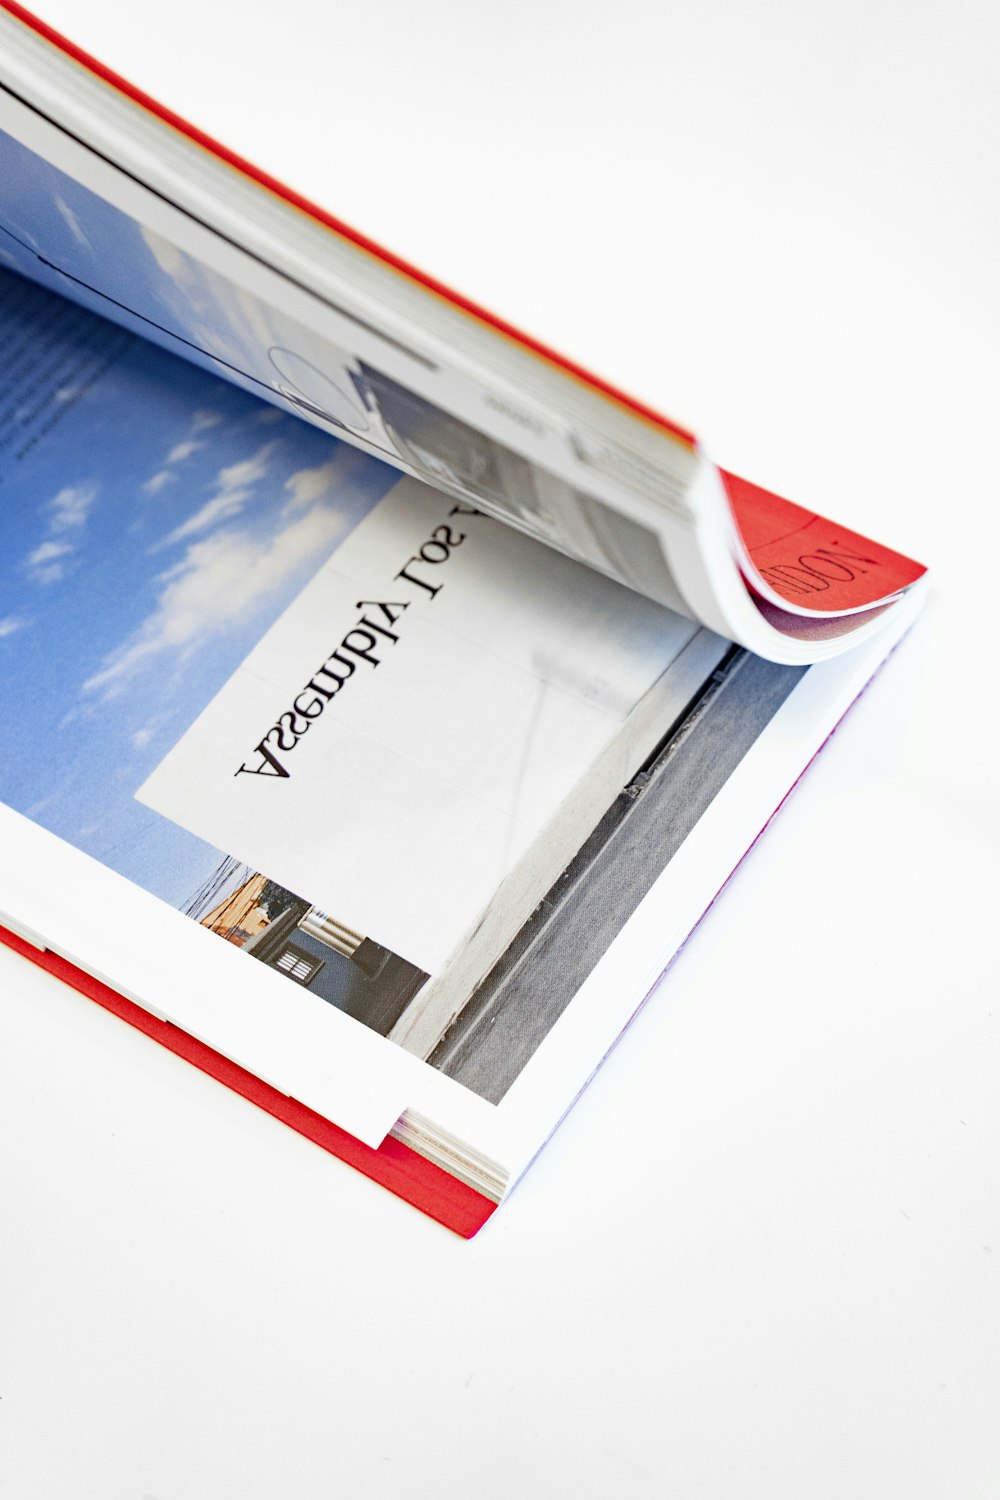 an open magazine with a red cover on a white table